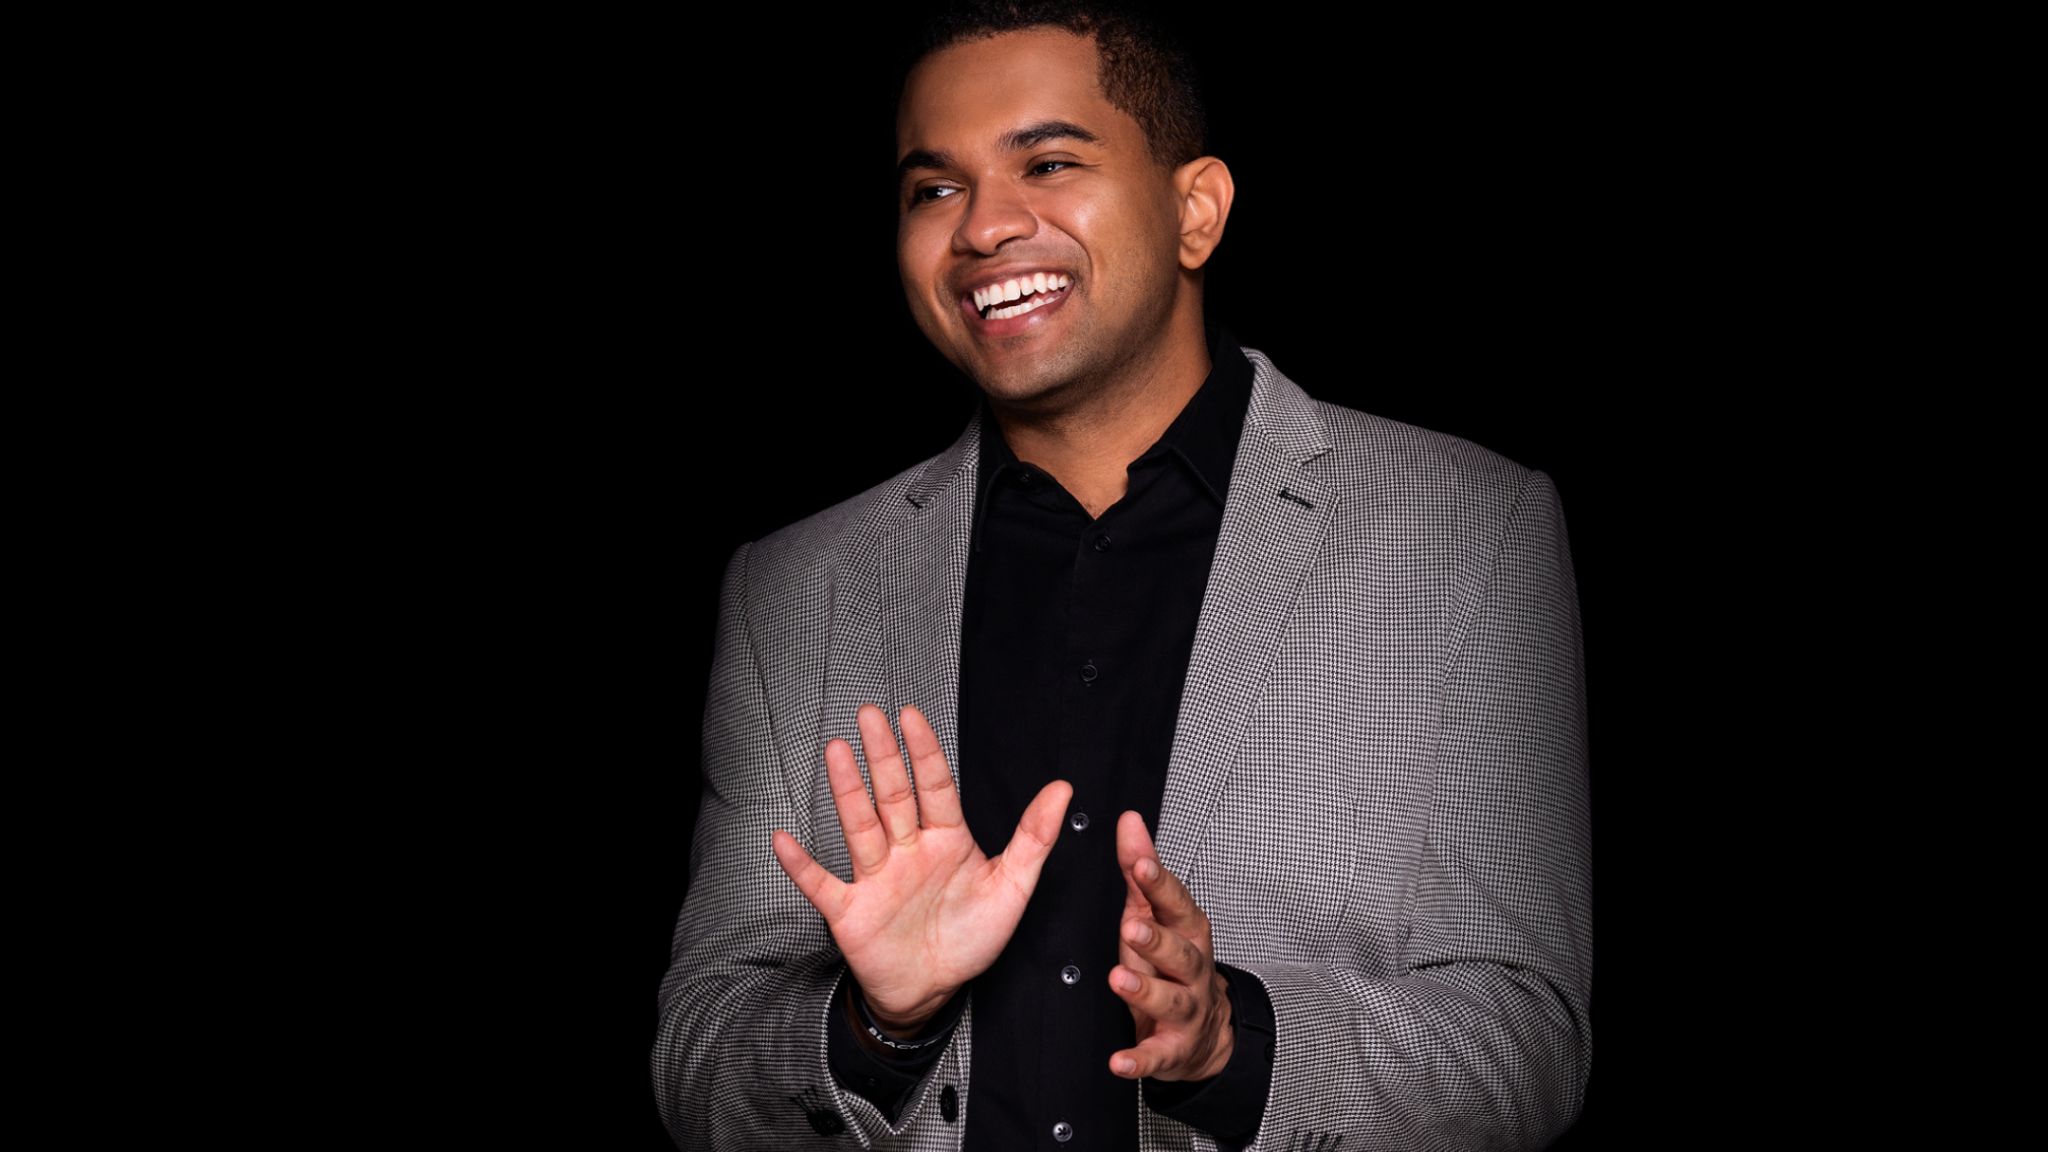 Taylor Stewart, a black man smiling in a gray suit in a dark room